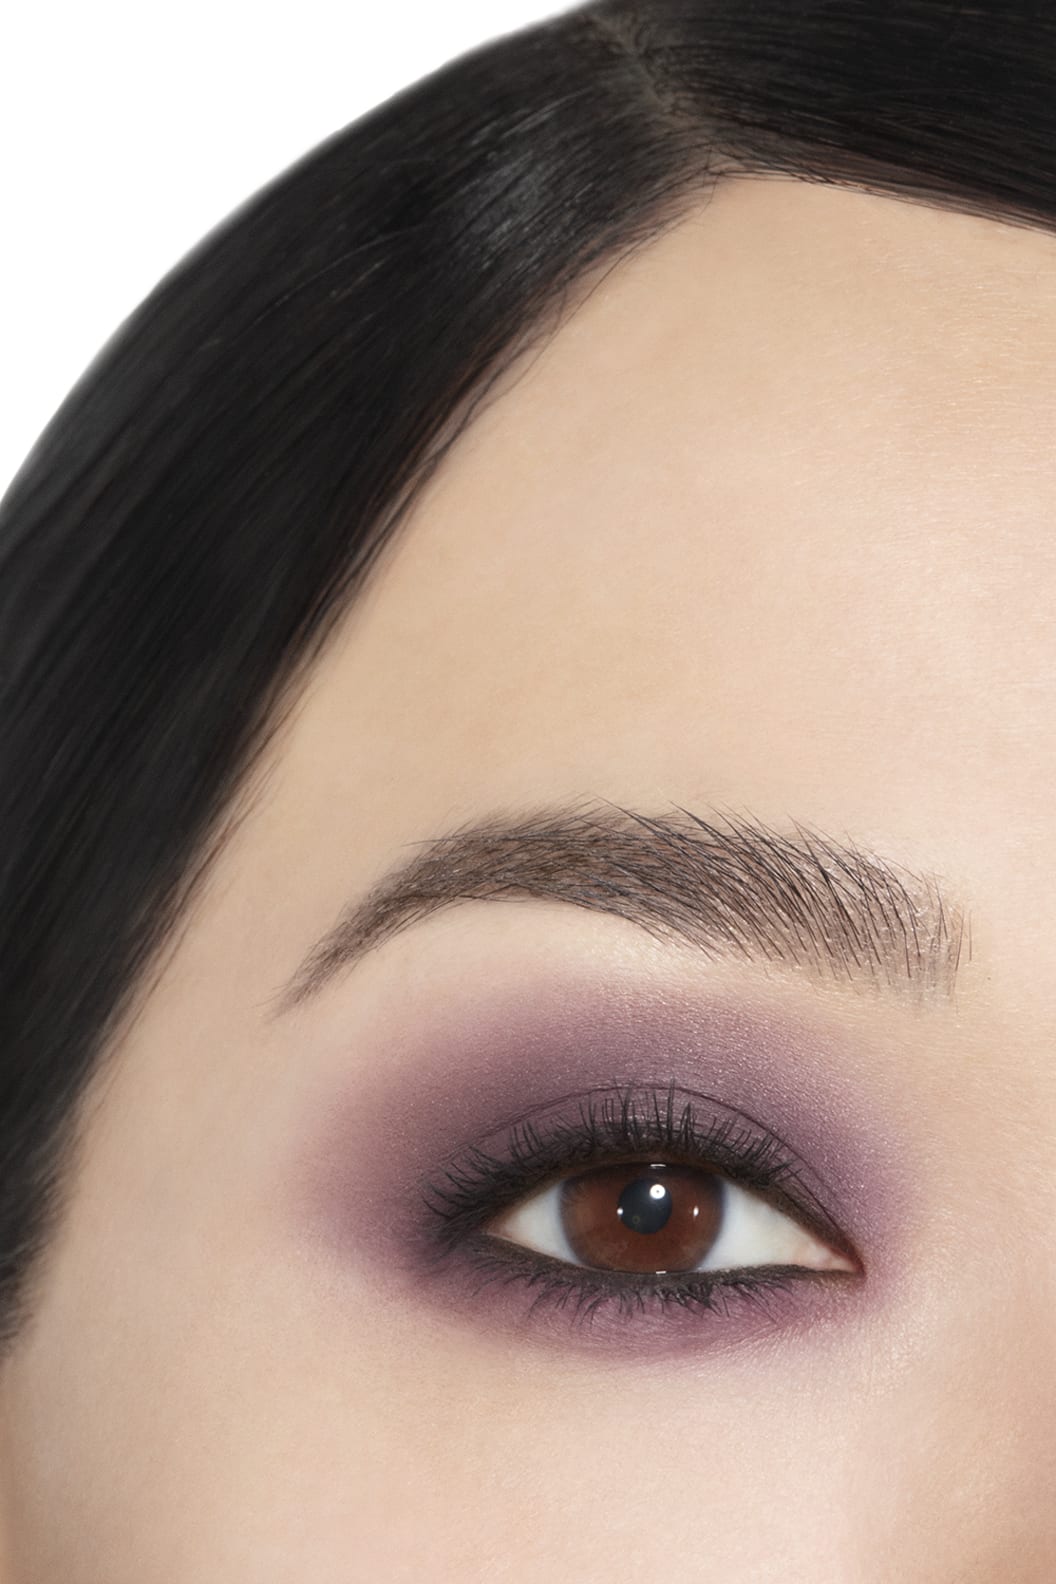 Phấn Mắt CHANEL Ombre Première Eyeshadow #30 Vibrant Violet